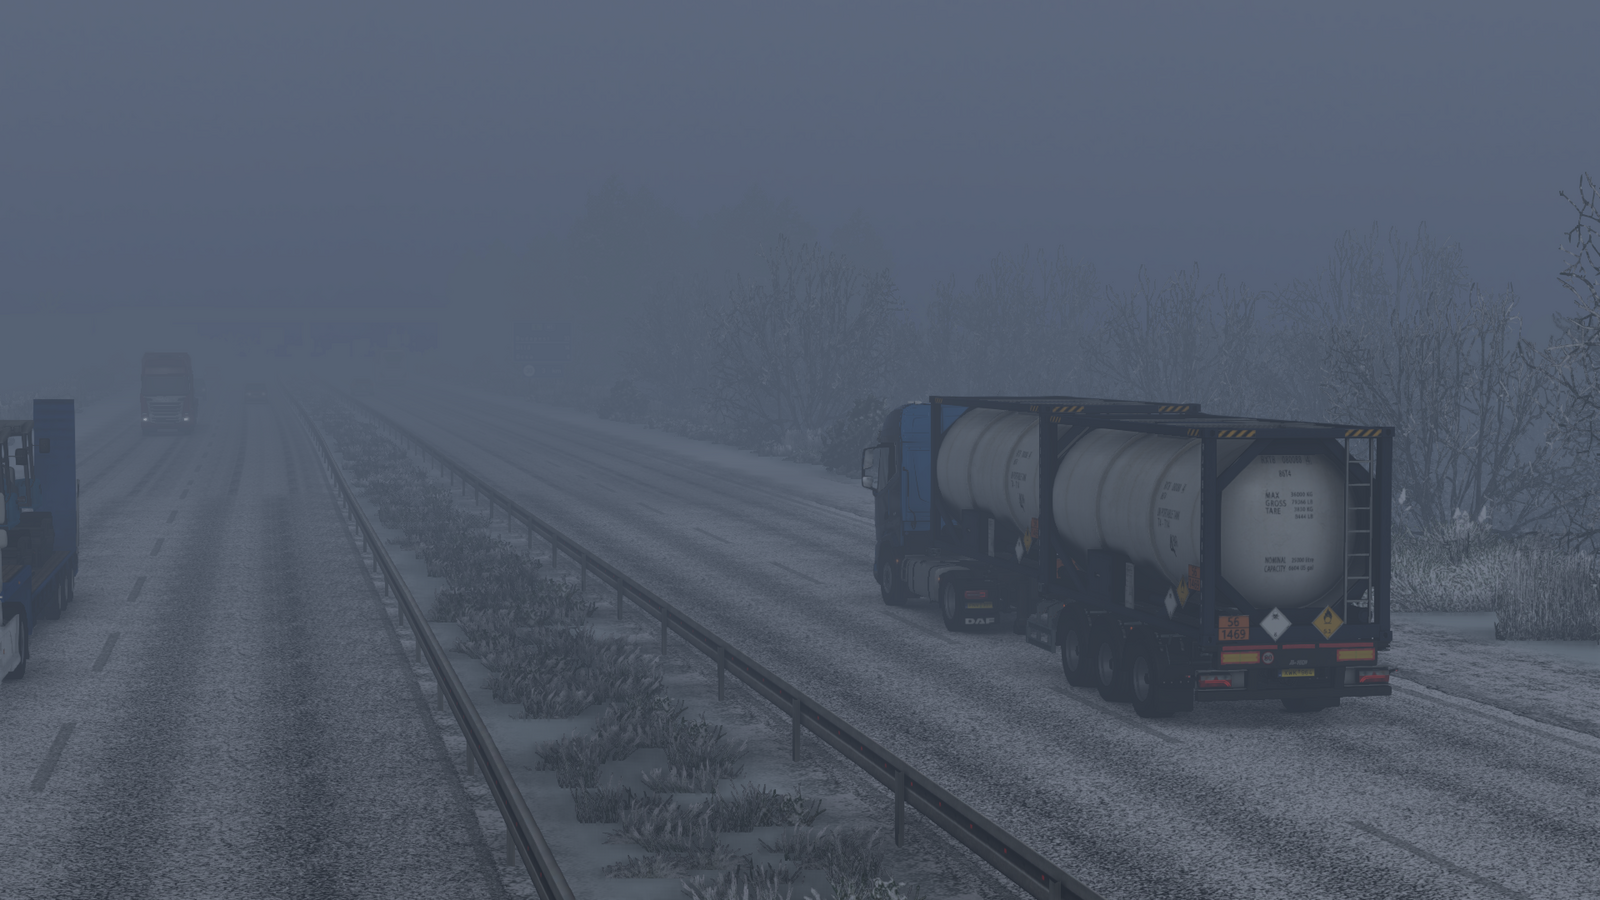 ets2_20221212_084621_00.png